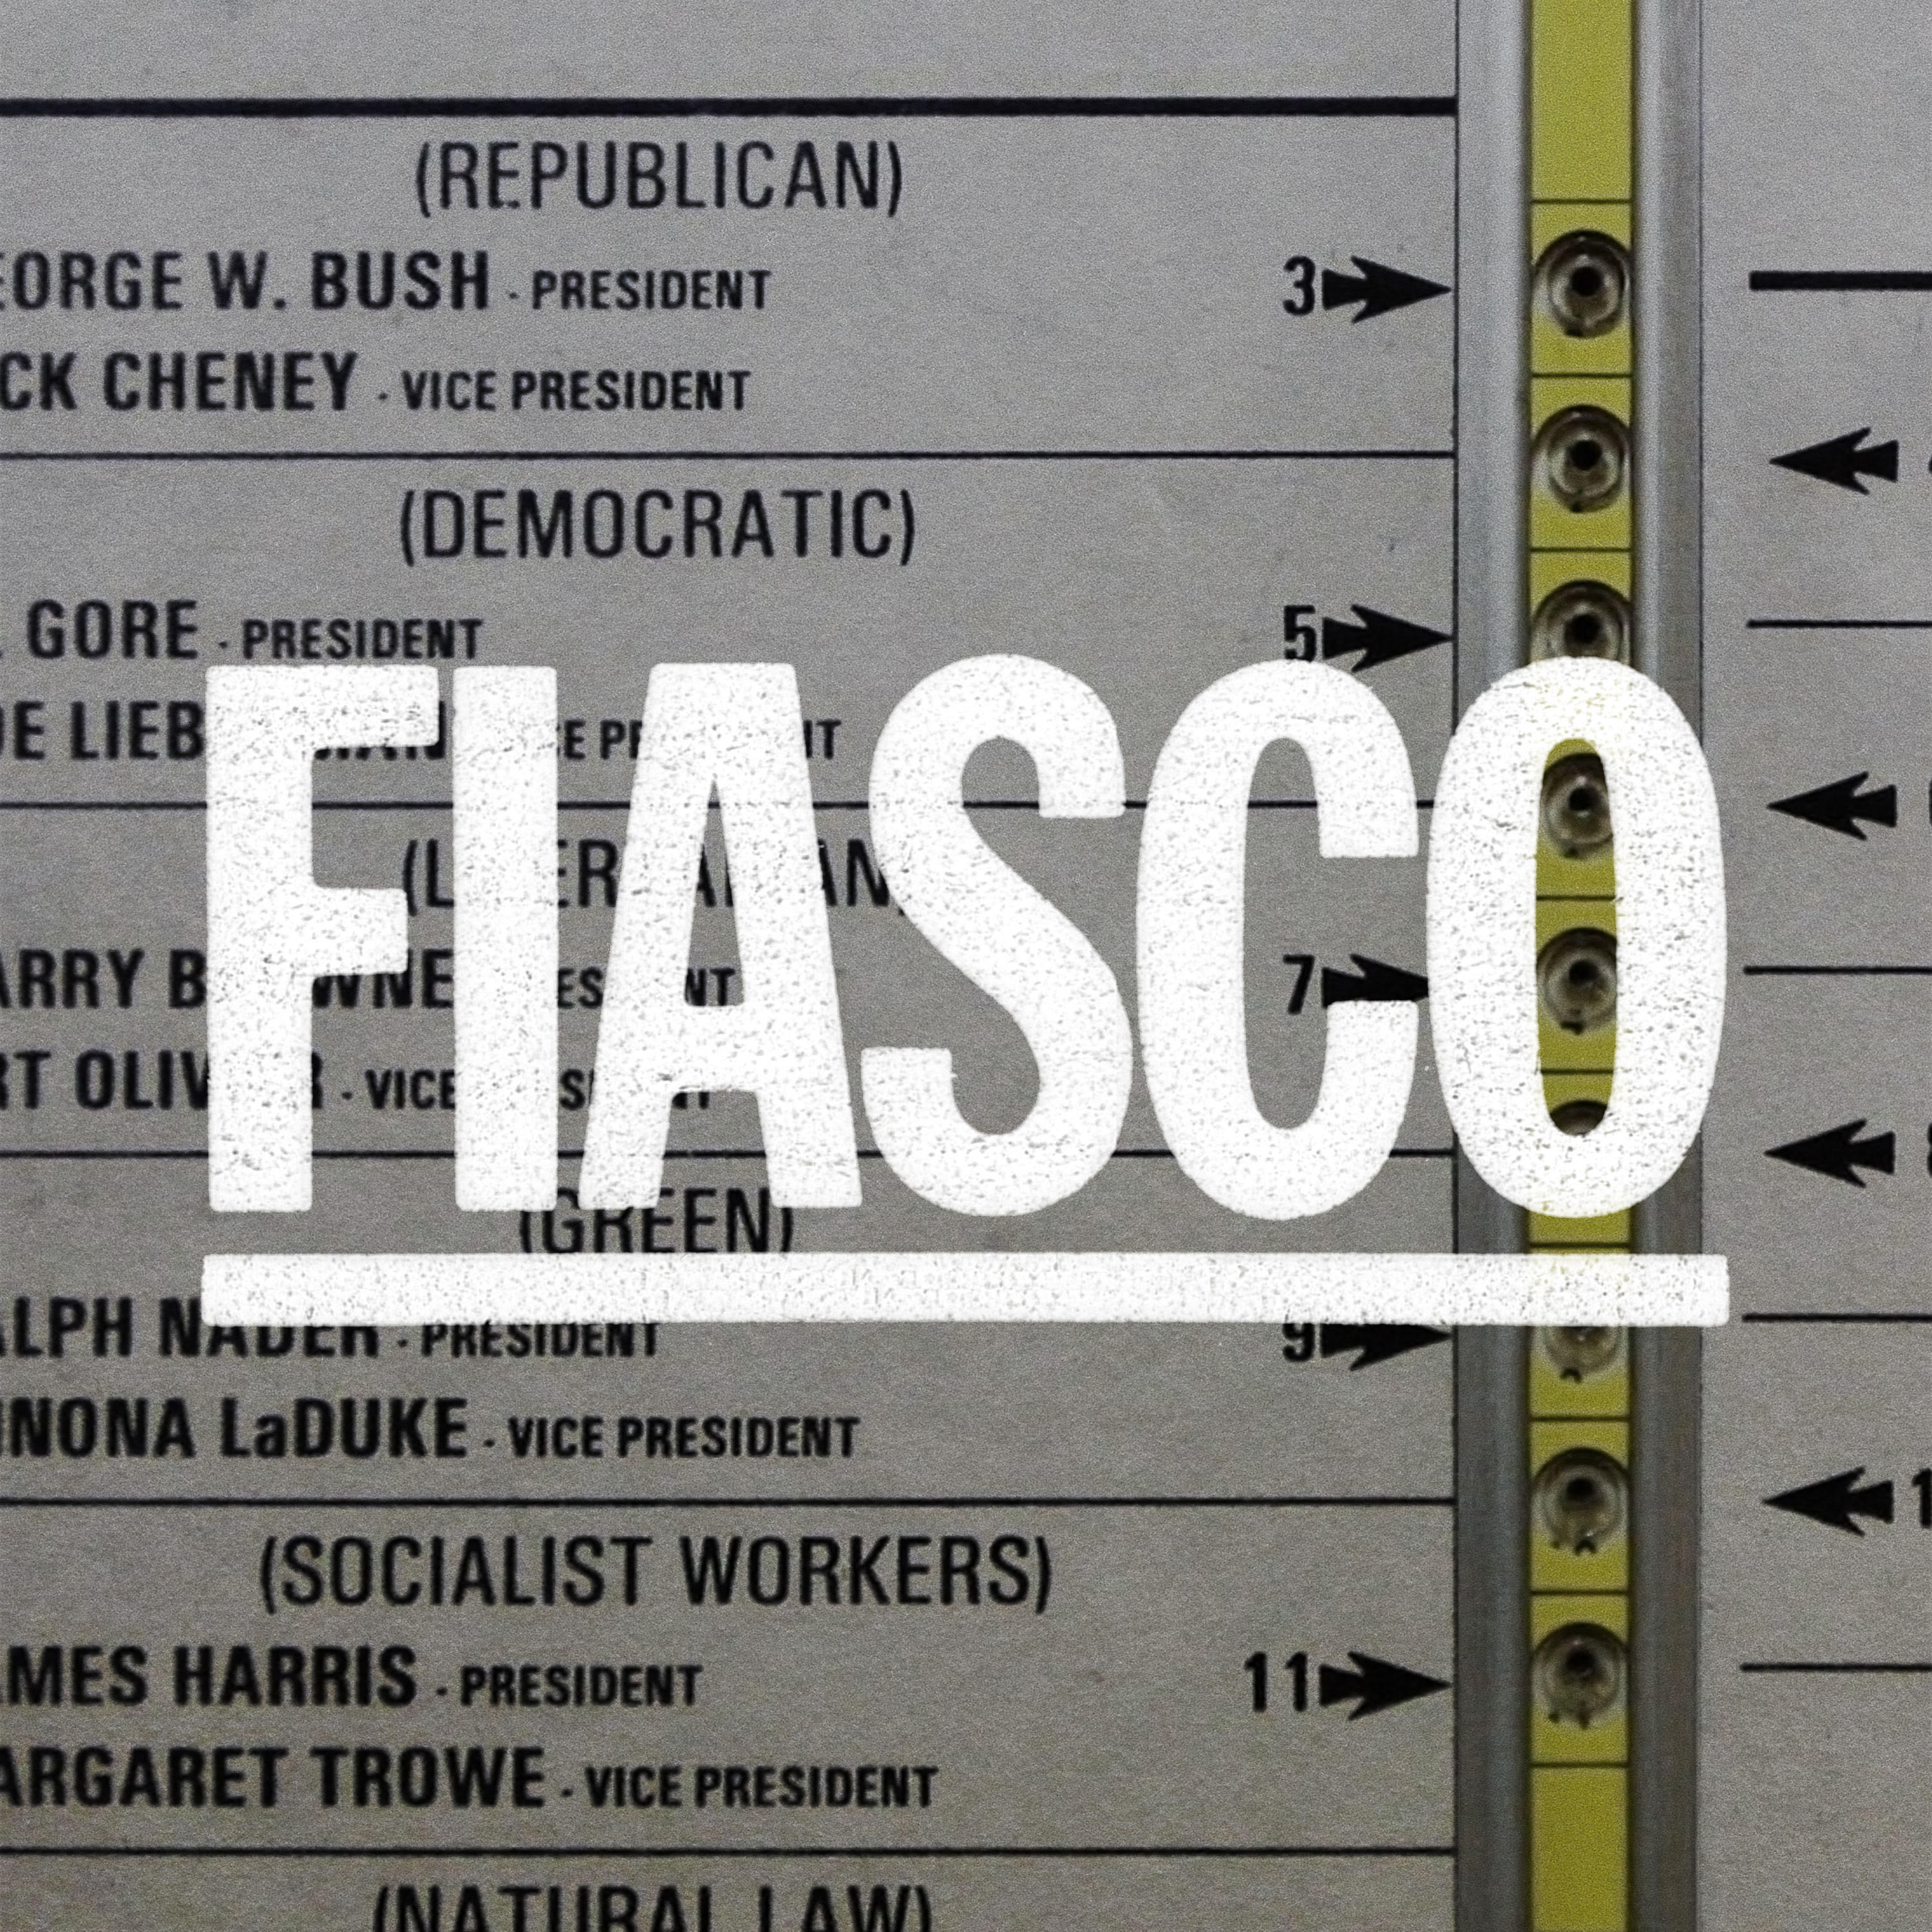 Fiasco: the infamous butterfly ballot from the 2000 u.s. presidential election, revealing an electoral slip-up that made history.